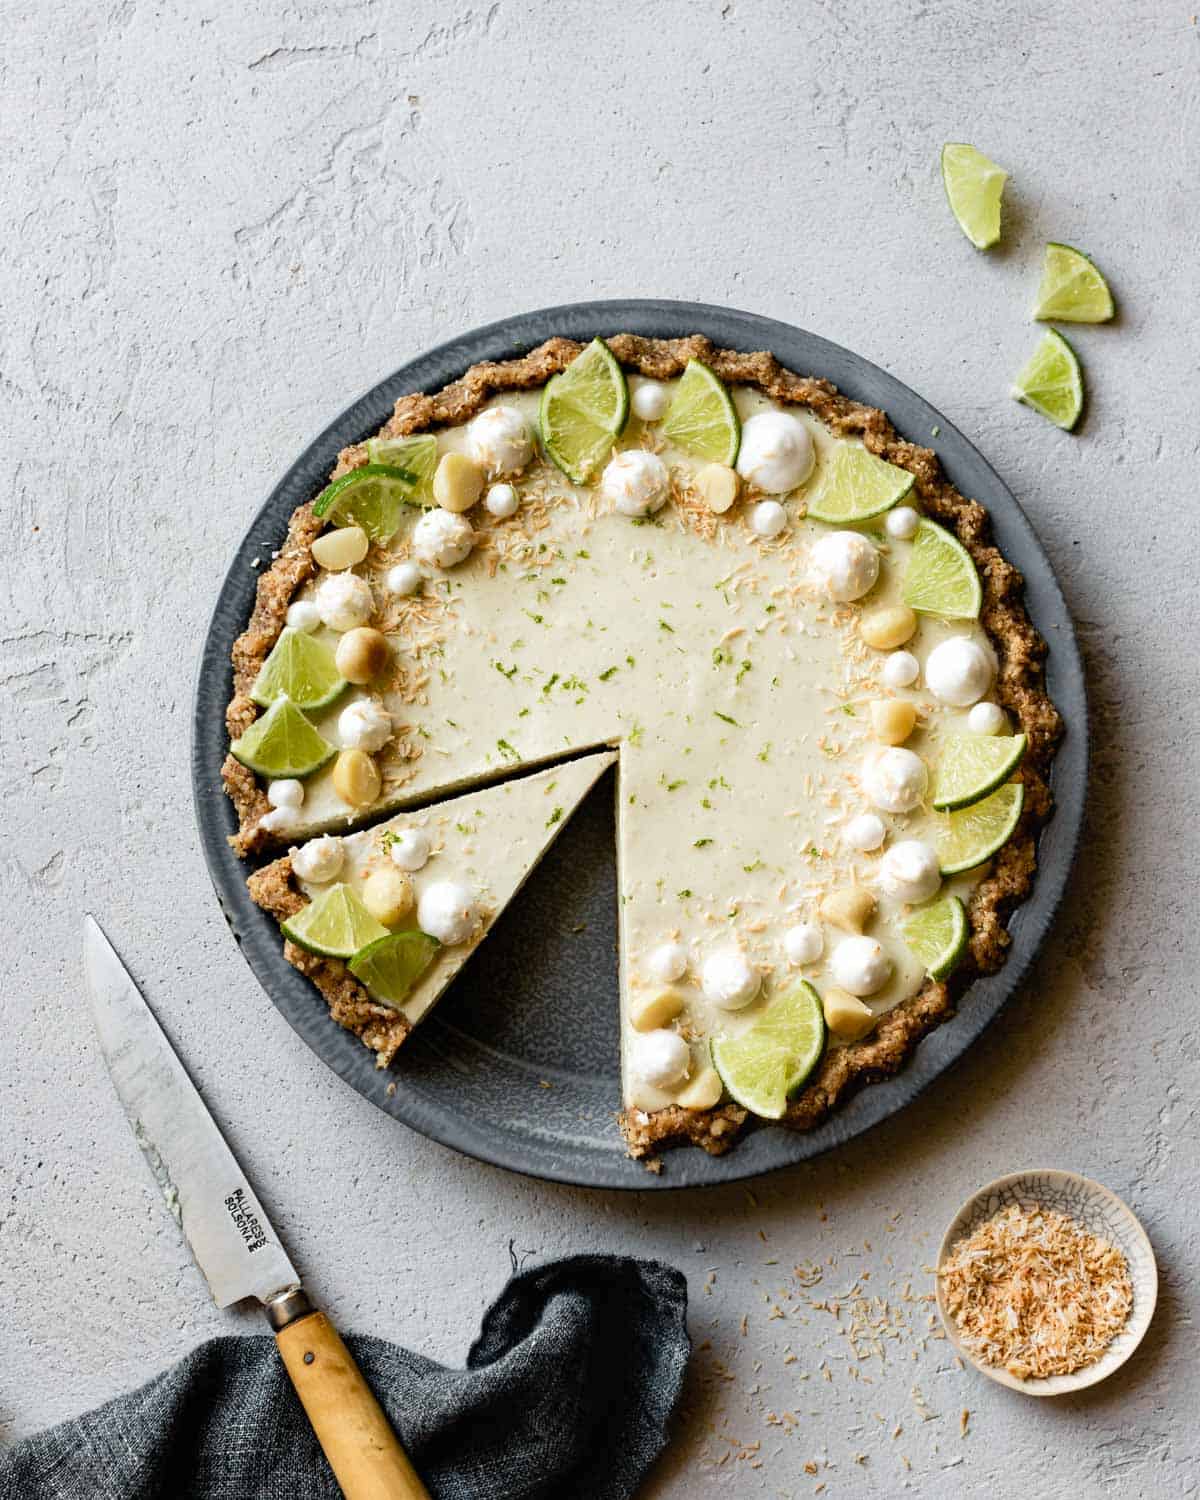 lime tart decorated with lime wedges, coconut, and macadamia nuts, over head on plaster surface